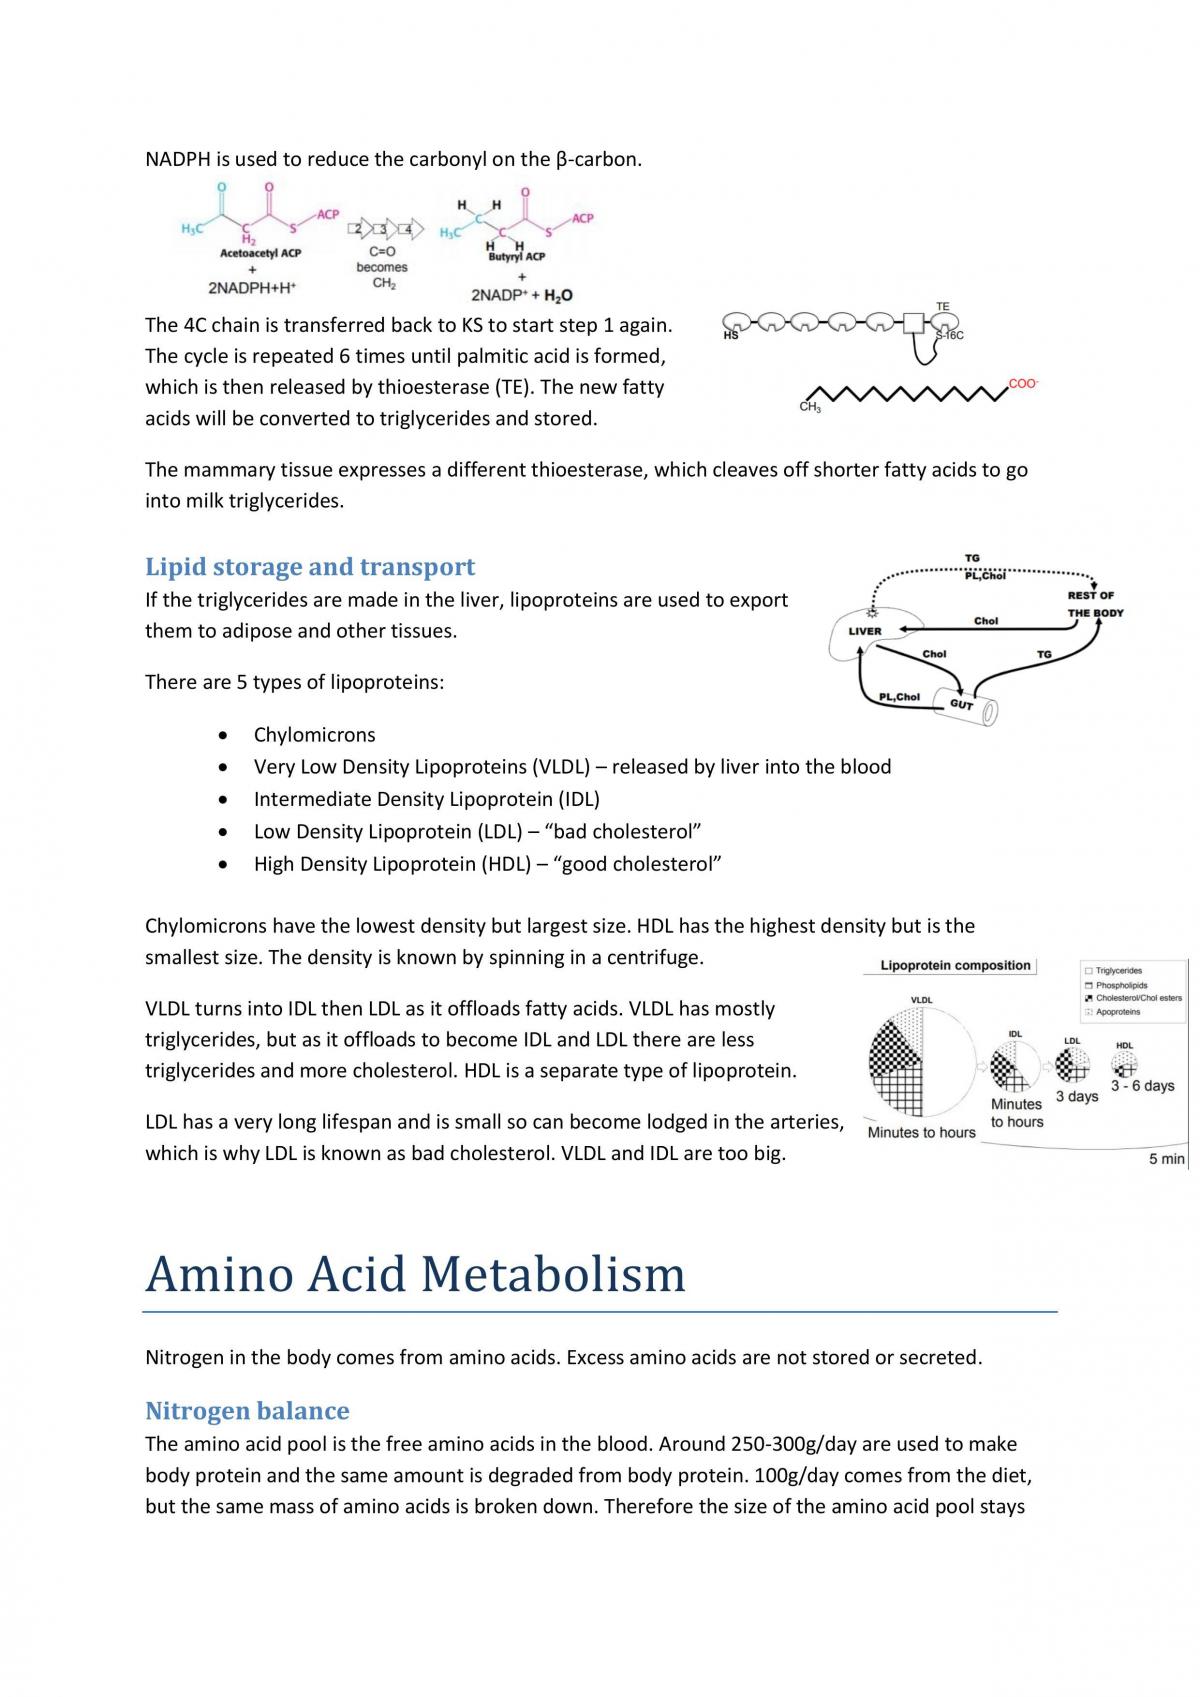 Metabolism and Metabolic Disorders Study Notes - Page 21